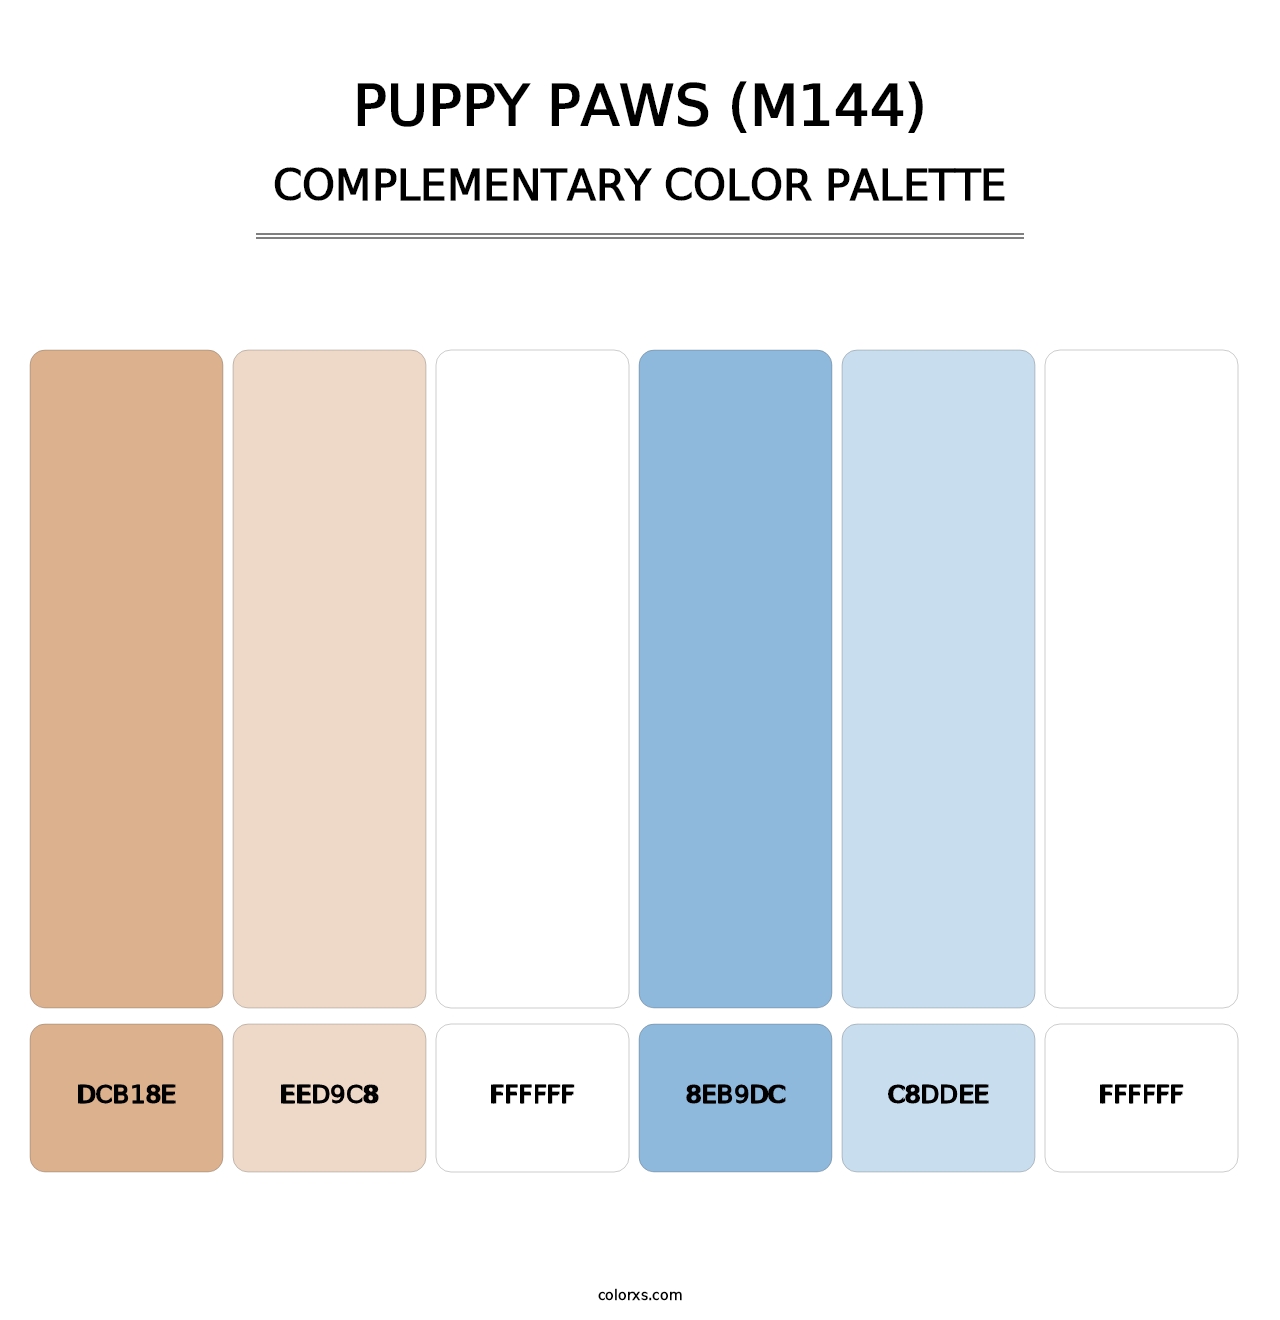 Puppy Paws (M144) - Complementary Color Palette